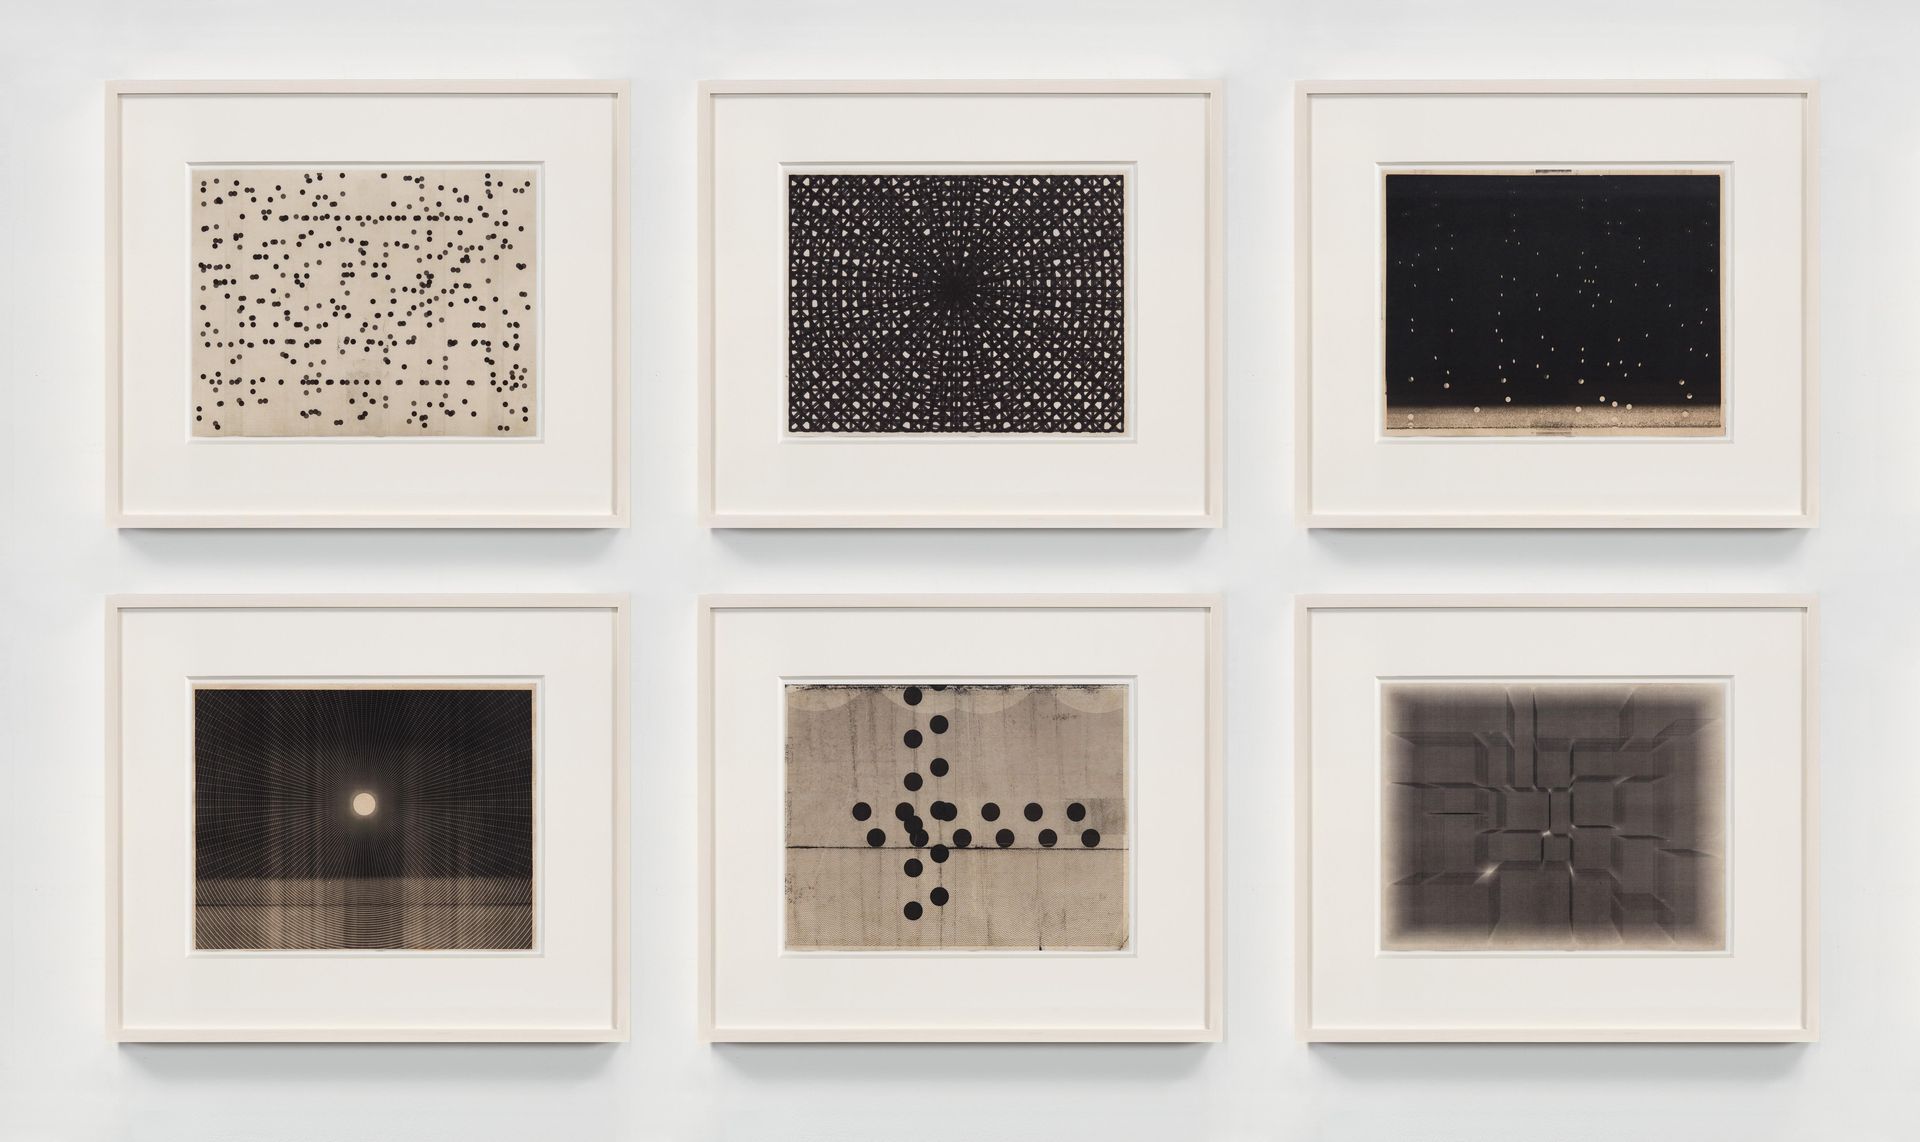 Marsha Cottrell, Untitled (Notation), 2020 / Diagram (Radiating)_2, 2019 / Untitled, 2021 / Untitled (1:20:51 pm), 2021 / Untitled, 2020 / Environments_19, 2018, Courtesy the artist and Petra Rinck Galerie